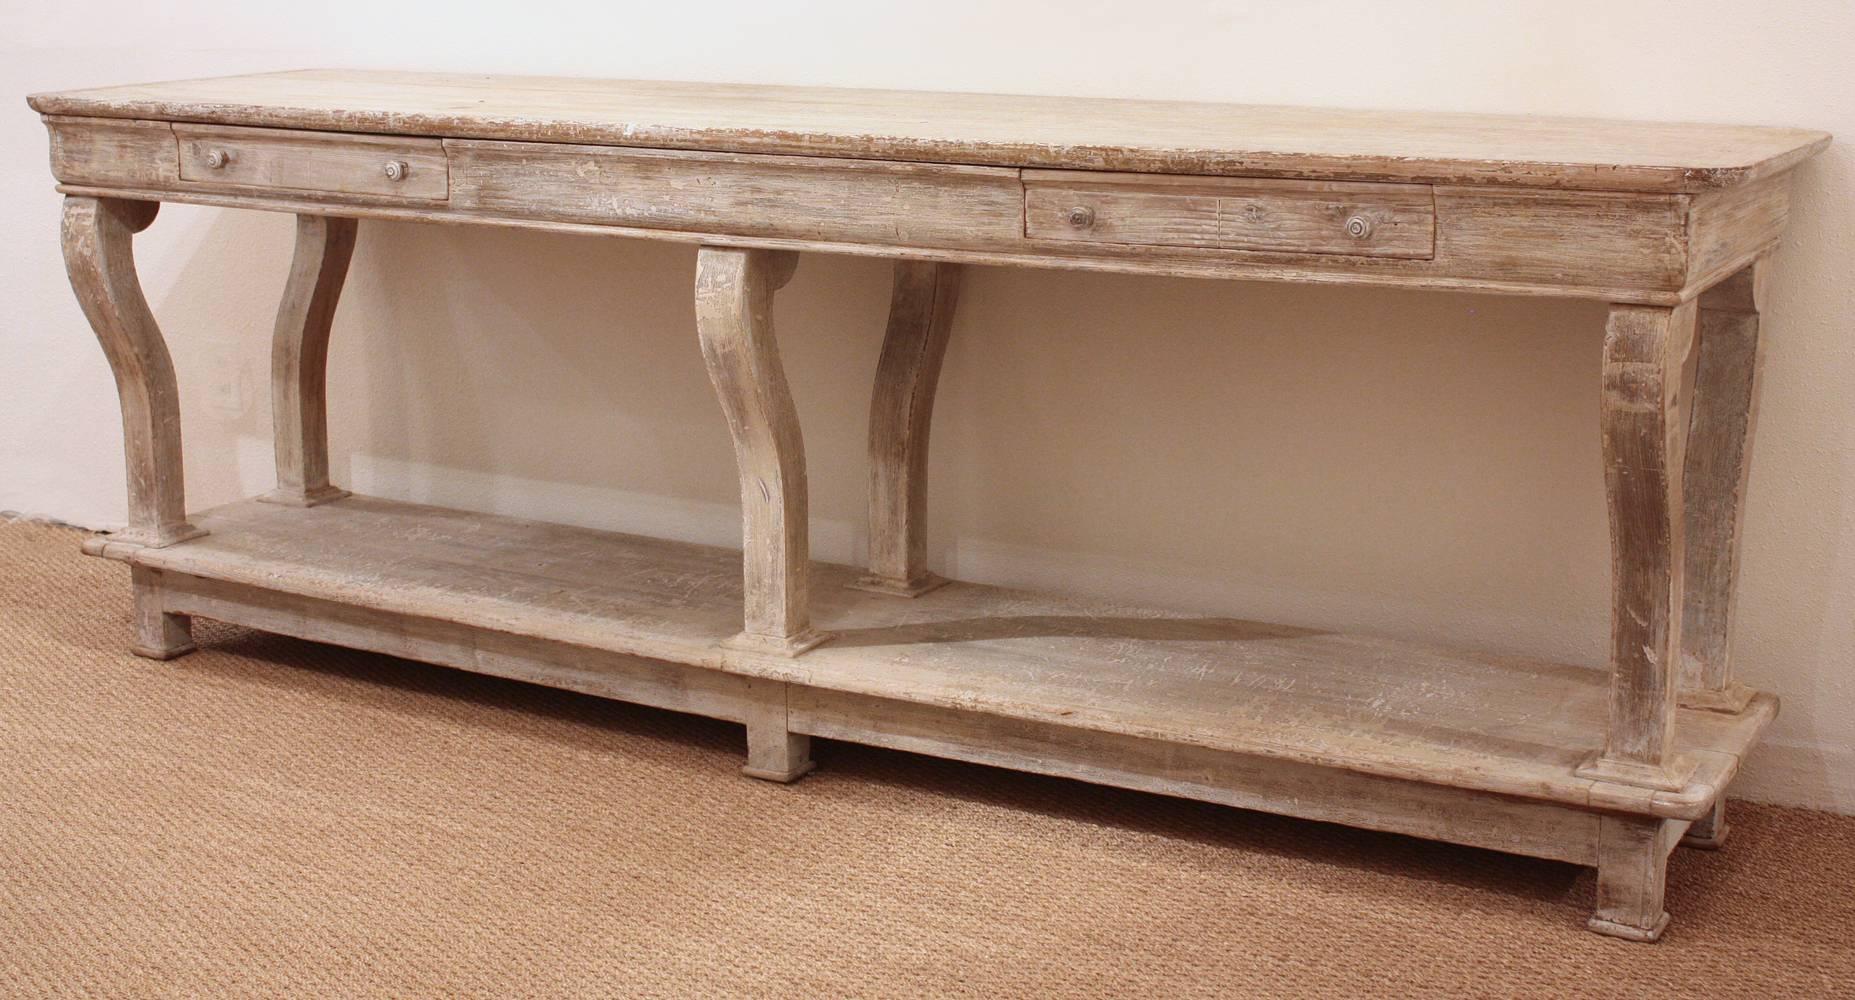 Exceptional mid-19th century French console table, with original white painted finish, two drawers on one side, finished on all four sides (could be floated in a room) sturdy condition.